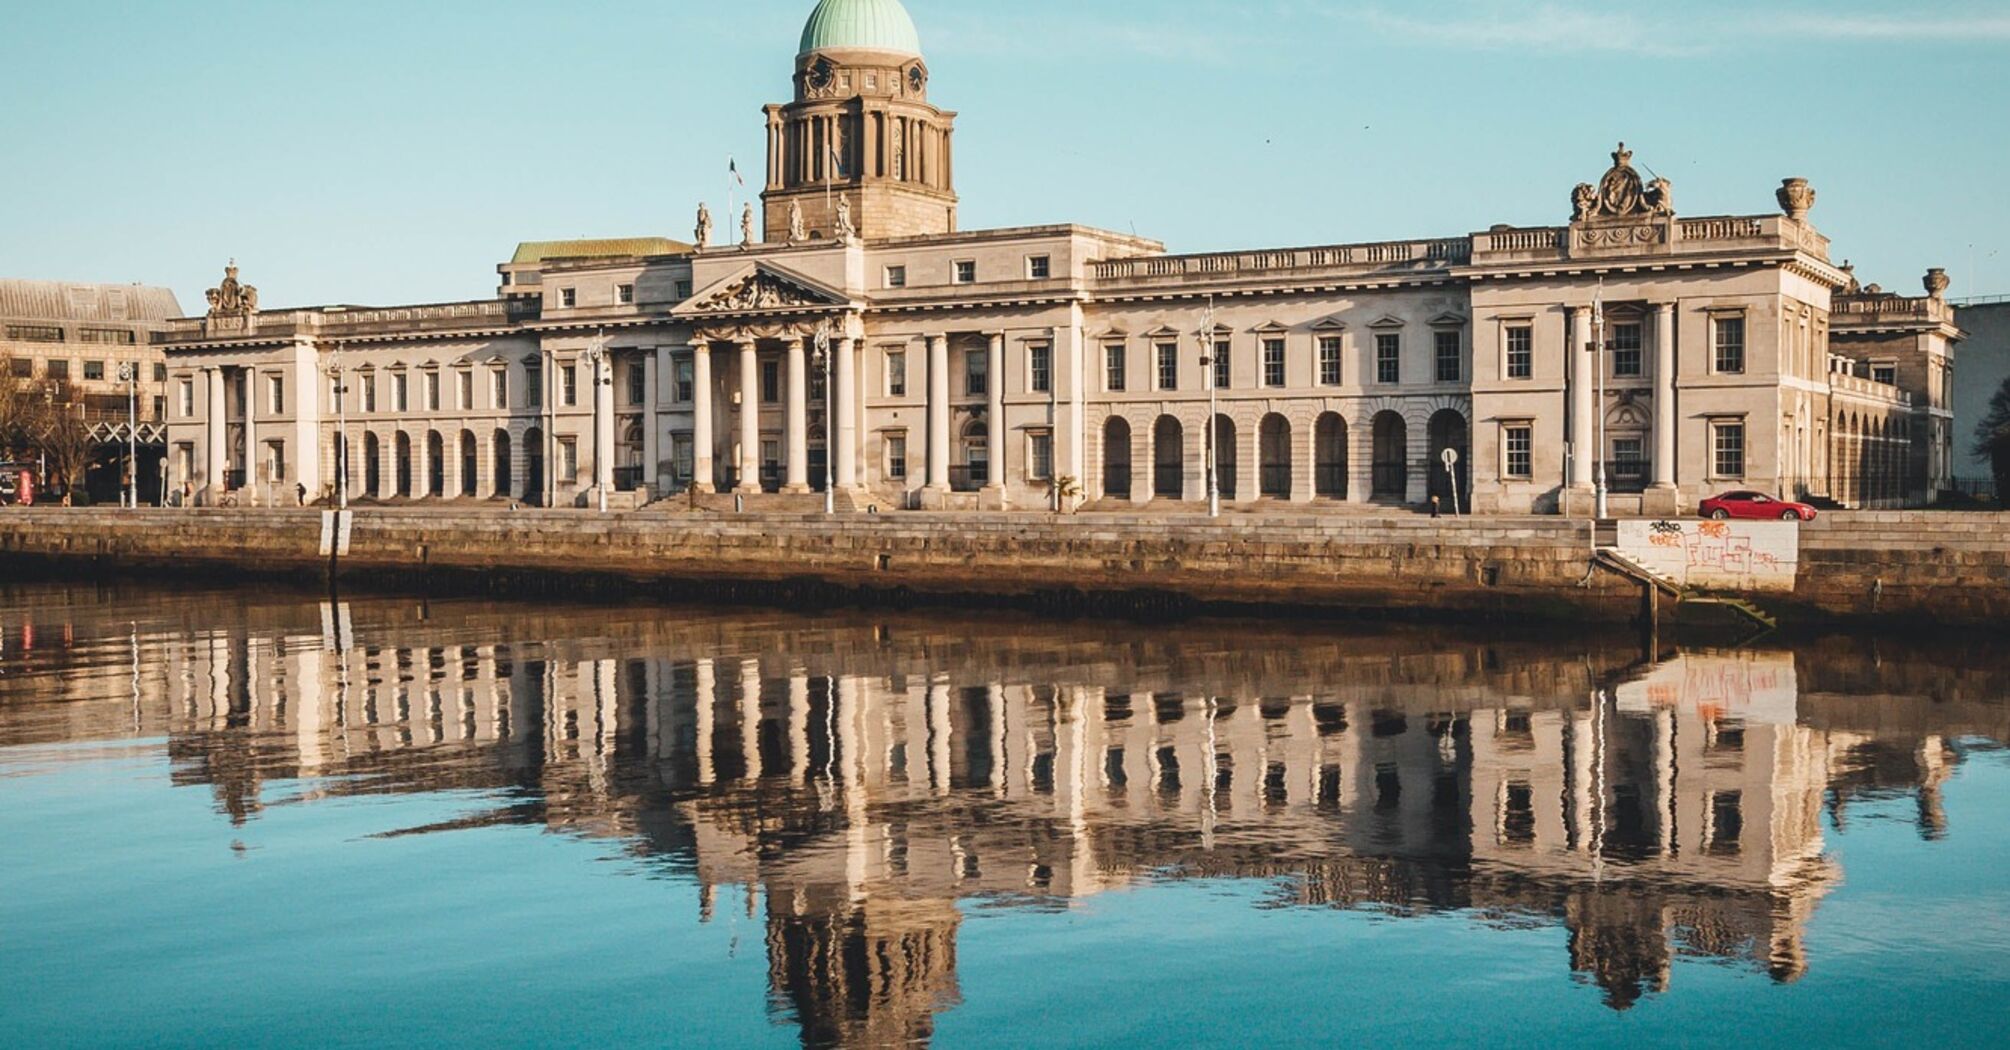 The best neighborhoods in Dublin for comfortable living and exploring popular attractions